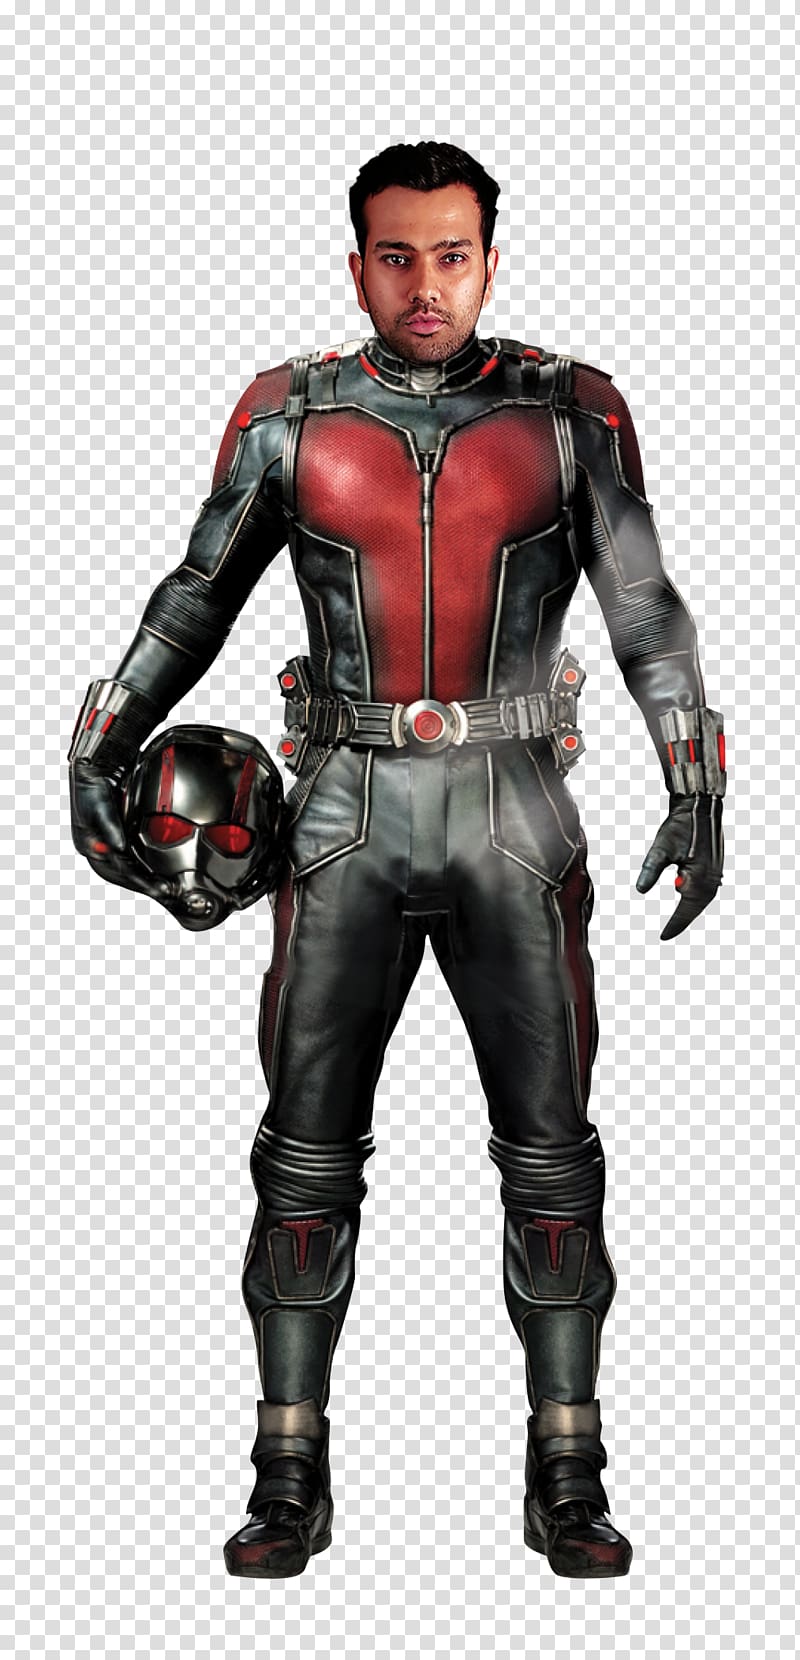 Paul Rudd Ant-Man Hank Pym Wasp Marvel Cinematic Universe, Ant Man transparent background PNG clipart